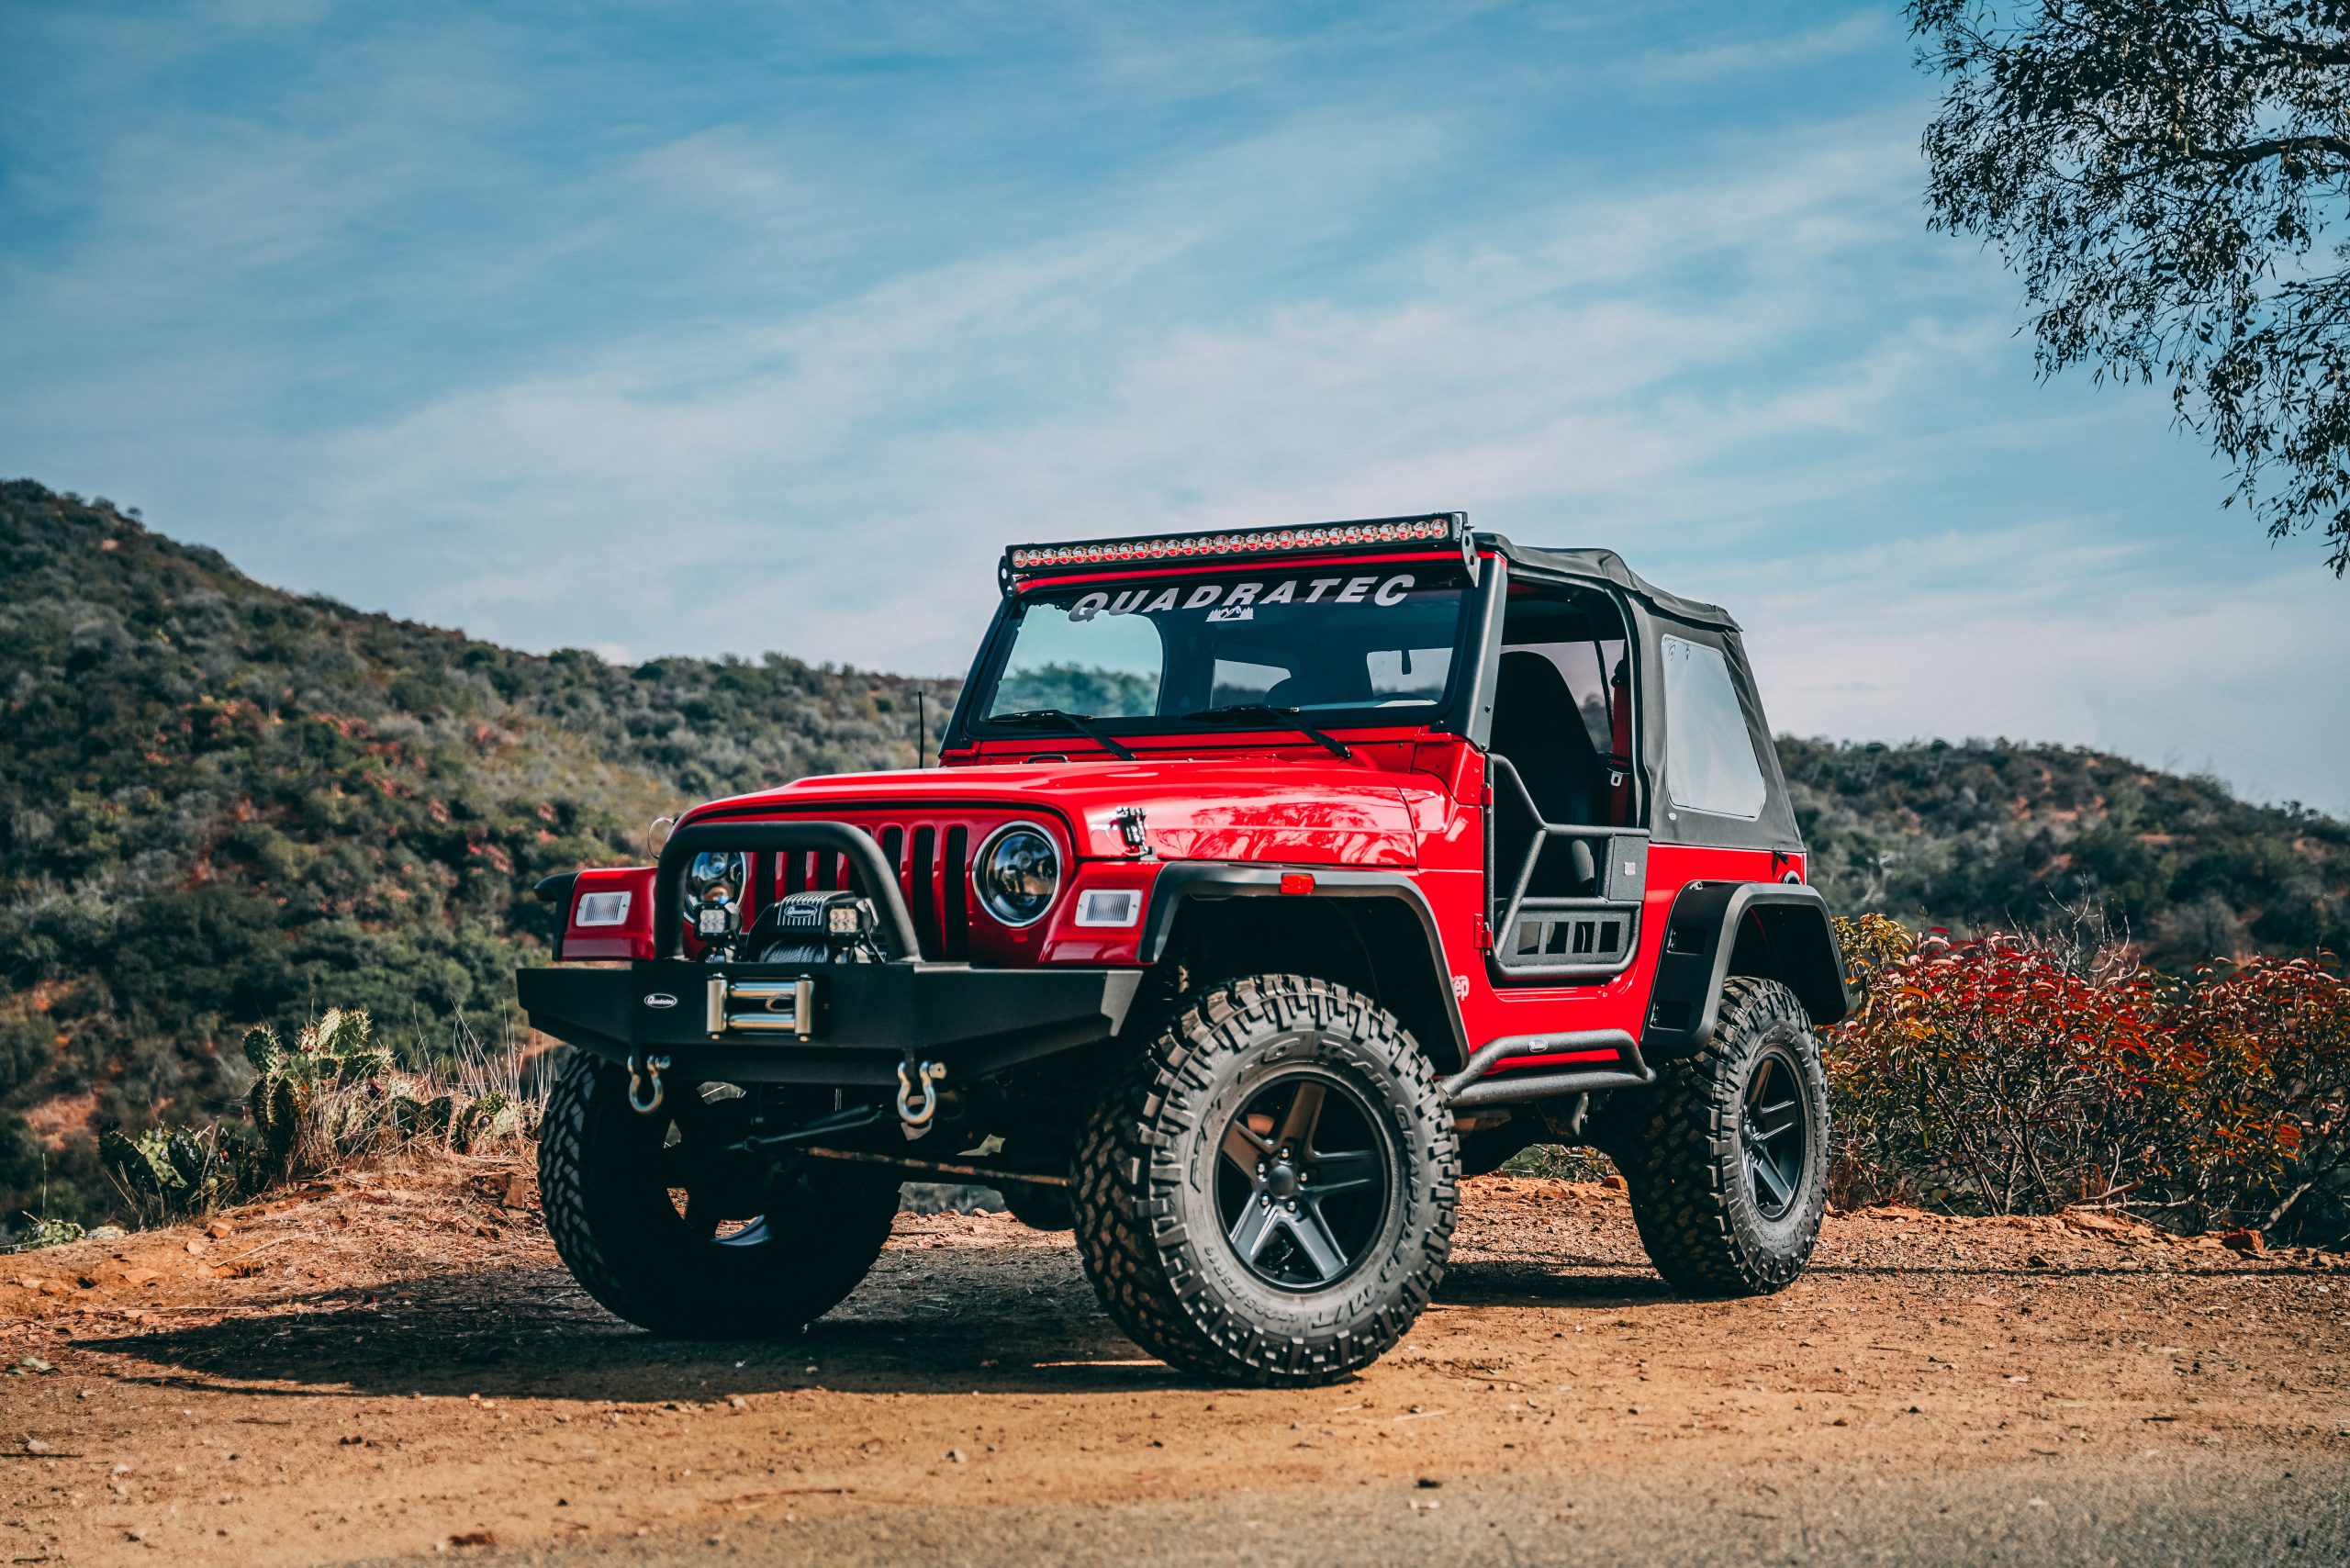 Quadratec Partners with Petersen Museum on Jeep Wrangler Giveaway | THE SHOP